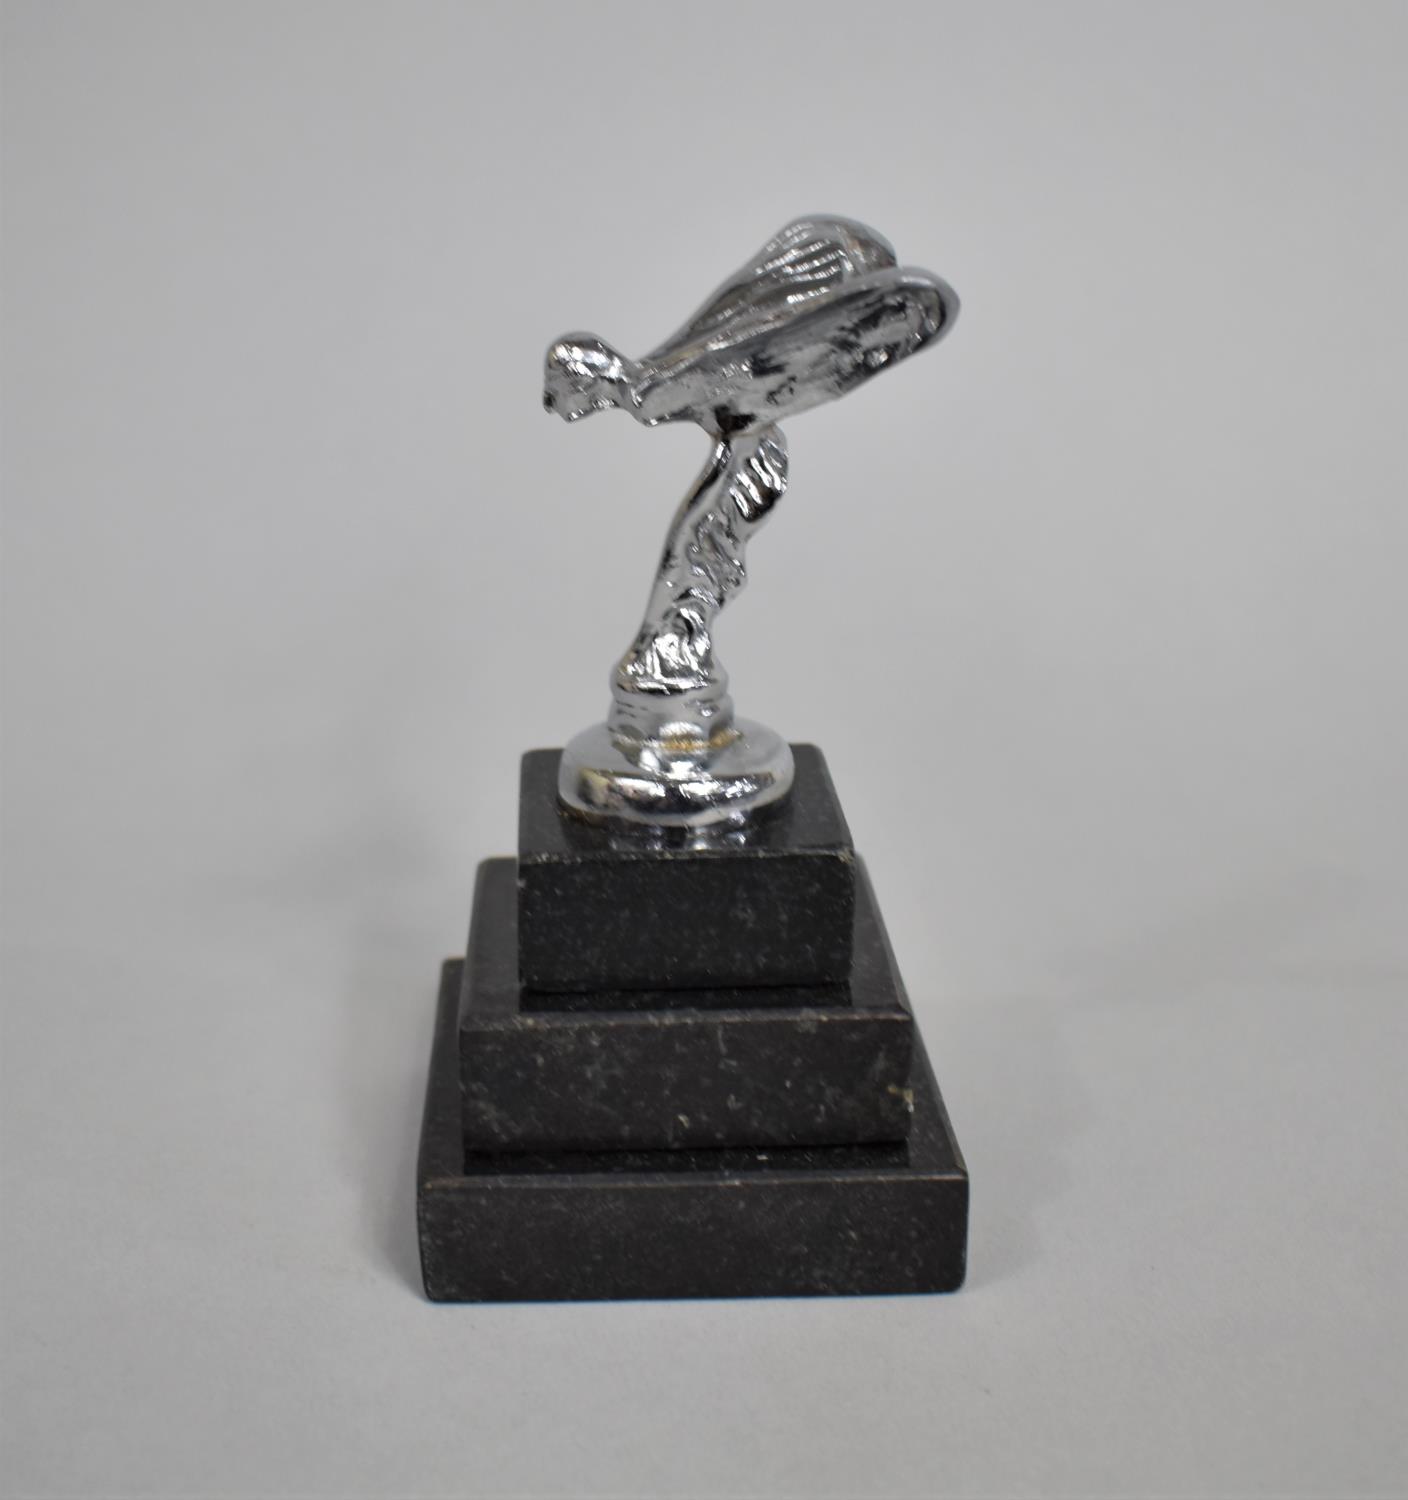 A Small Model of The Spirit of Ecstasy on Stepped Plinth, Overall Height 12cms - Image 5 of 5